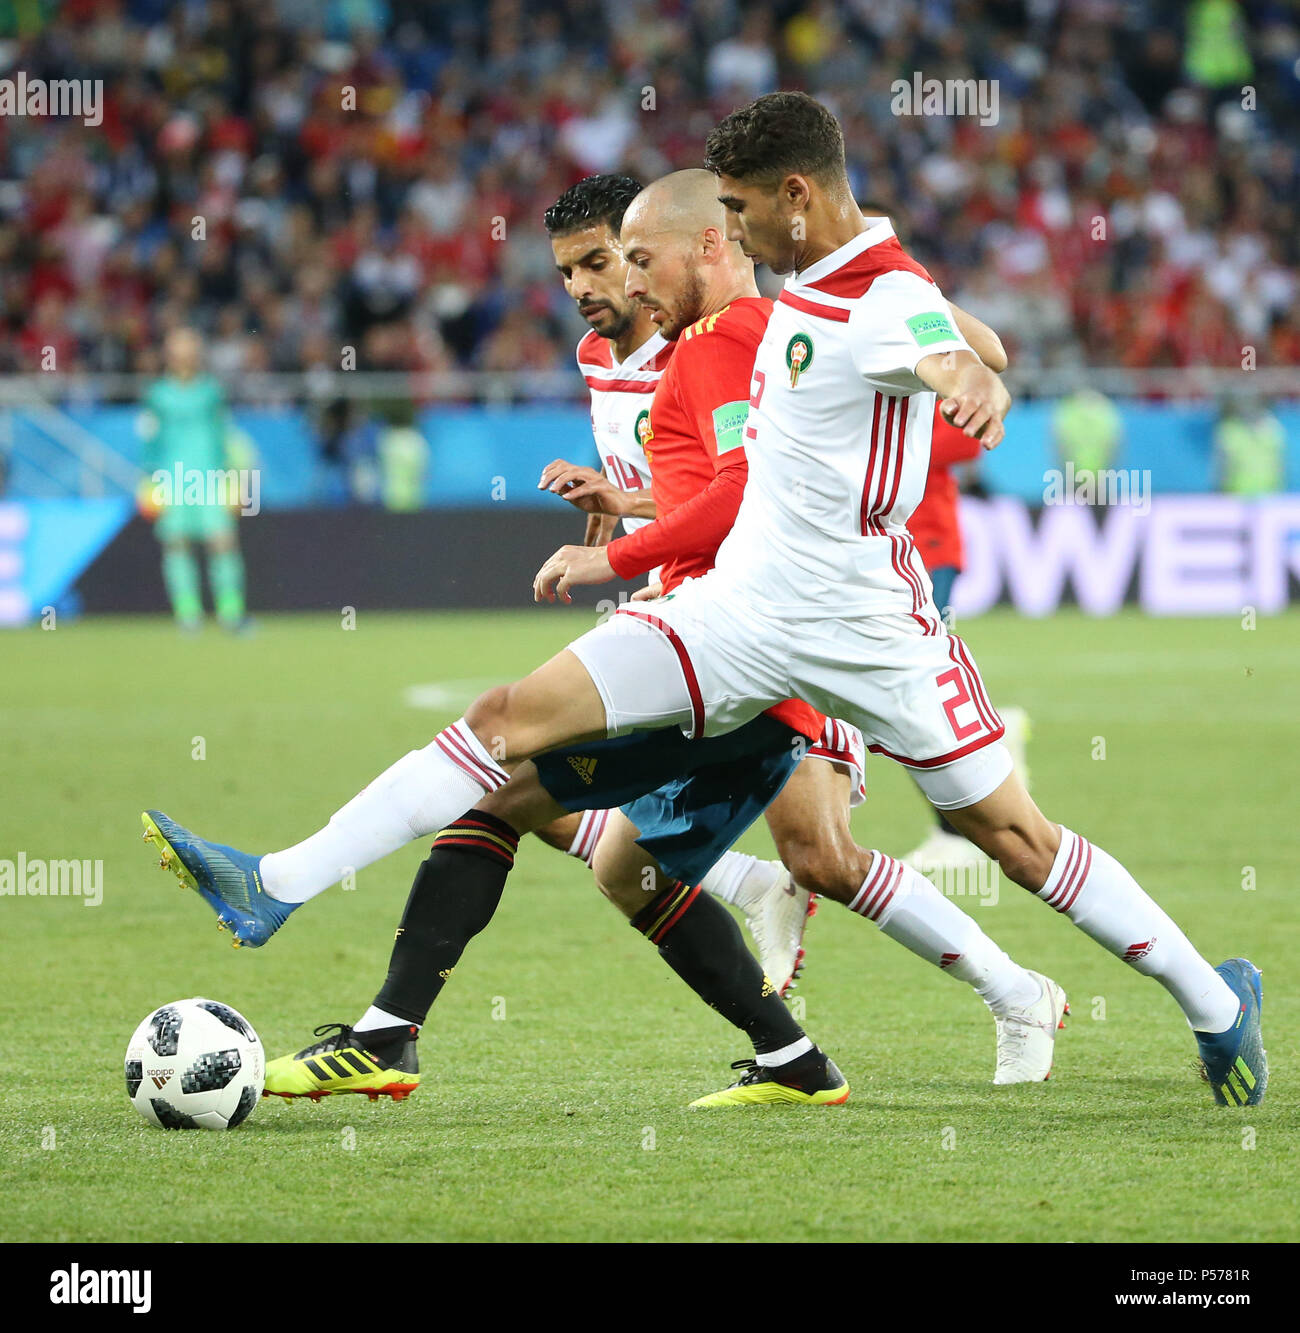 Kaliningrad, Russia. 25th June, 2018. David Silva (C) of Spain competes during the 2018 FIFA World Cup Group B match between Spain and Morocco in Kaliningrad, Russia, June 25, 2018. Credit: Li Ming/Xinhua/Alamy Live News Stock Photo